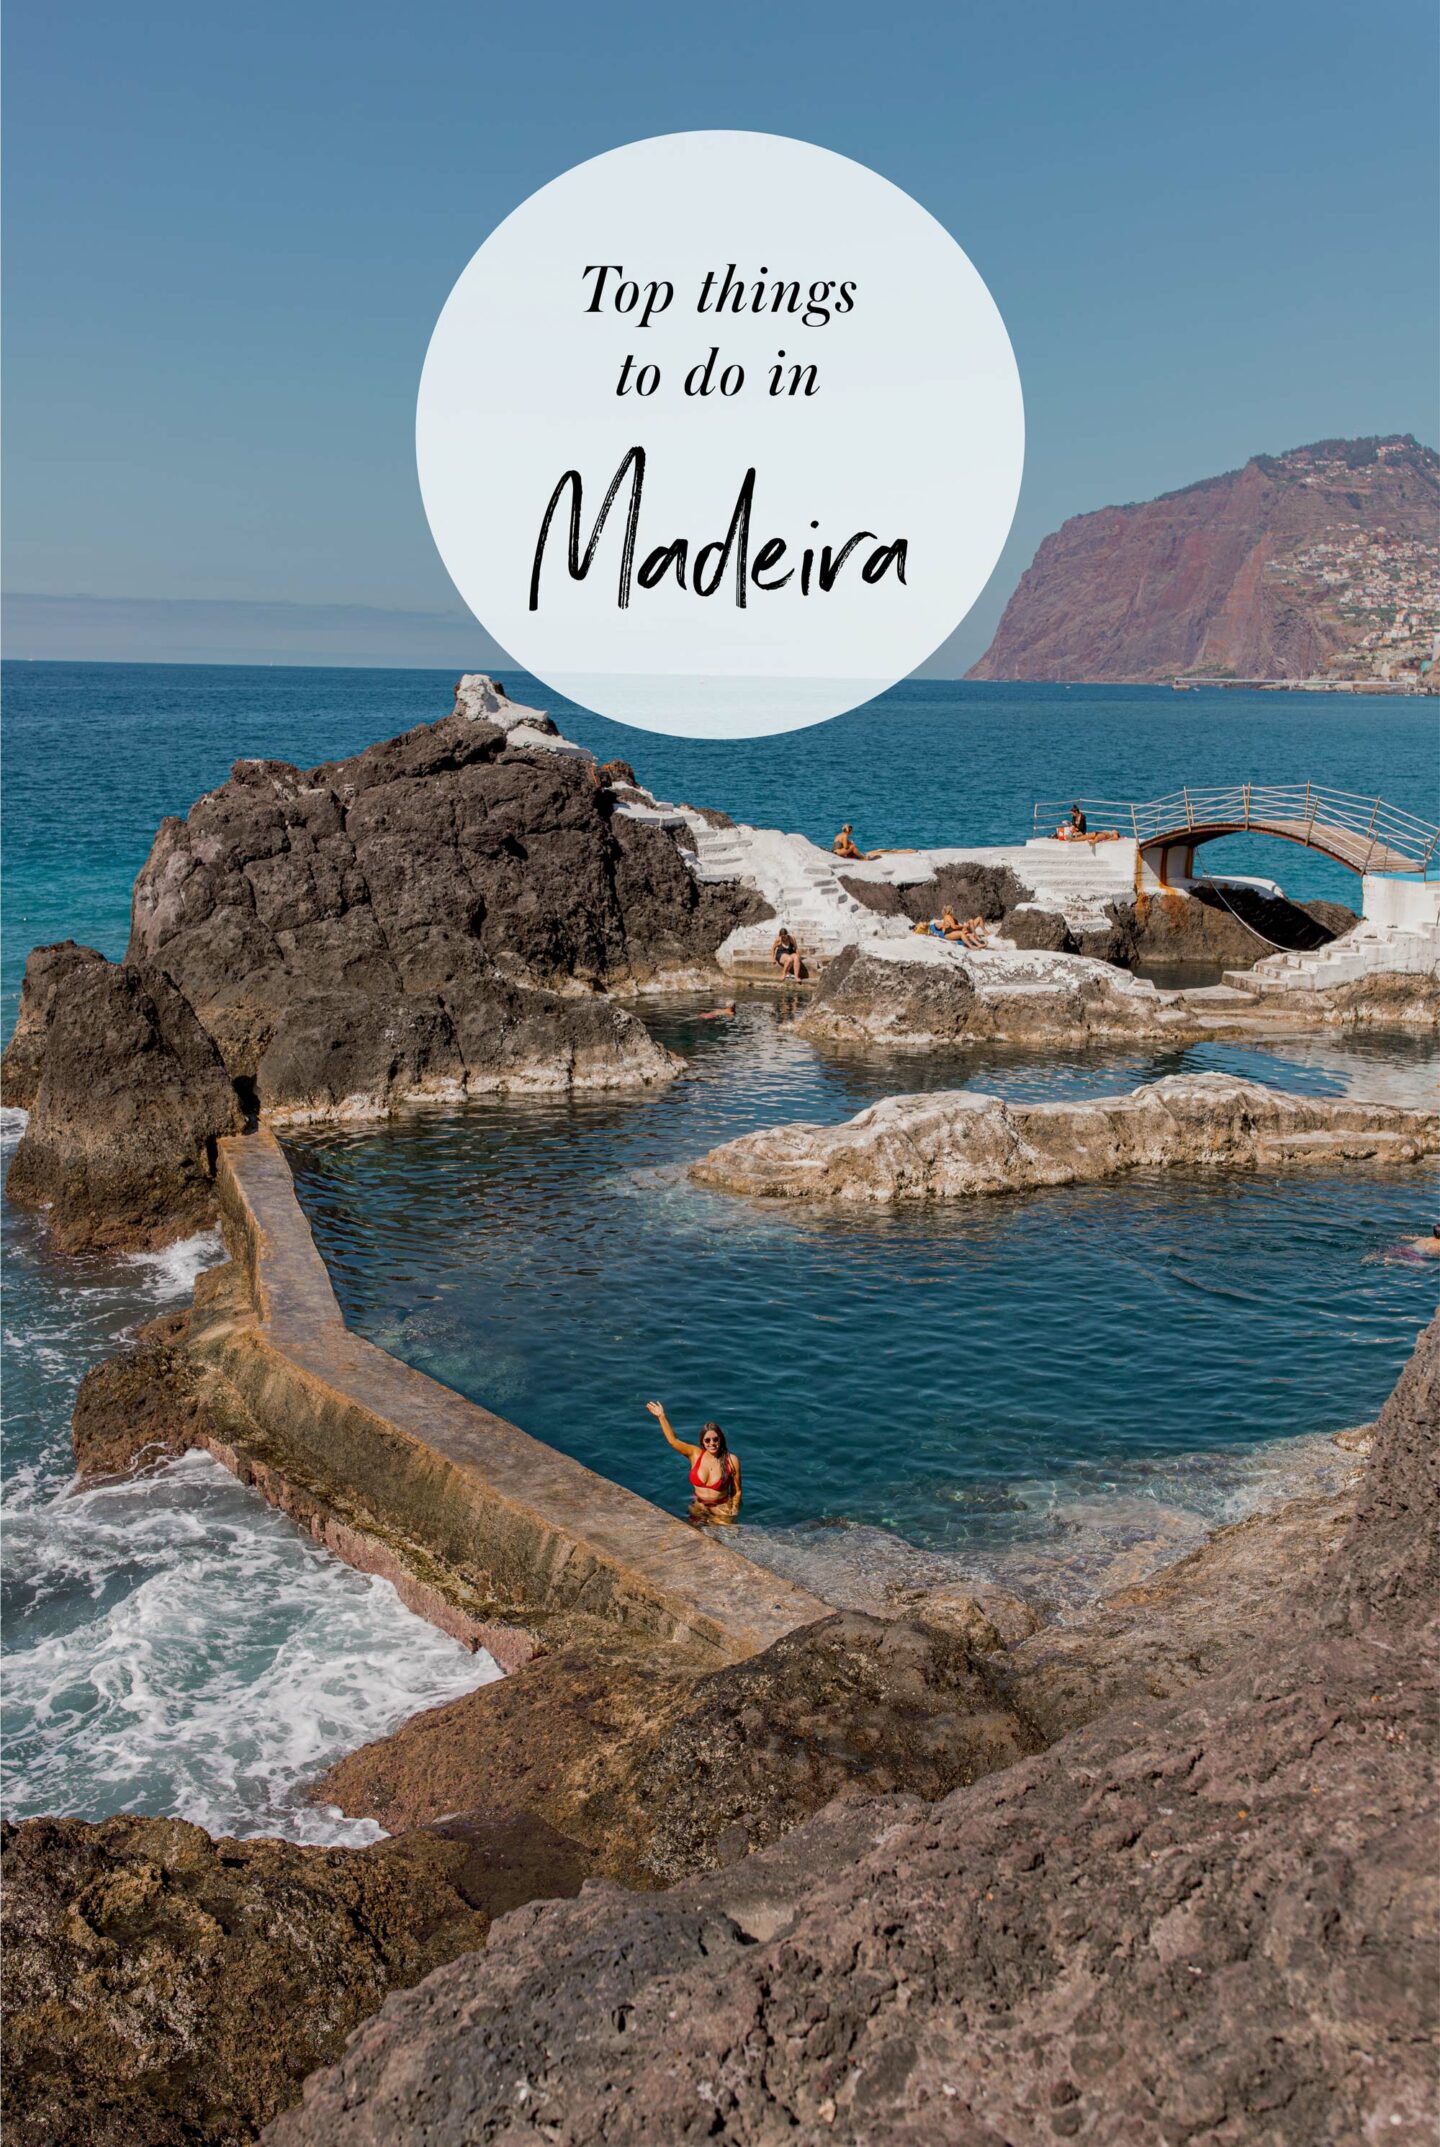 22-Top-things-to-do-in-madeira-Bucket-list--Instagram-Story-Template--kelseyinlondon-Kelsey-Heinrichs--What-to-do-in-madeira--Where-to-go-in-madeira-top-places-in-madeira-